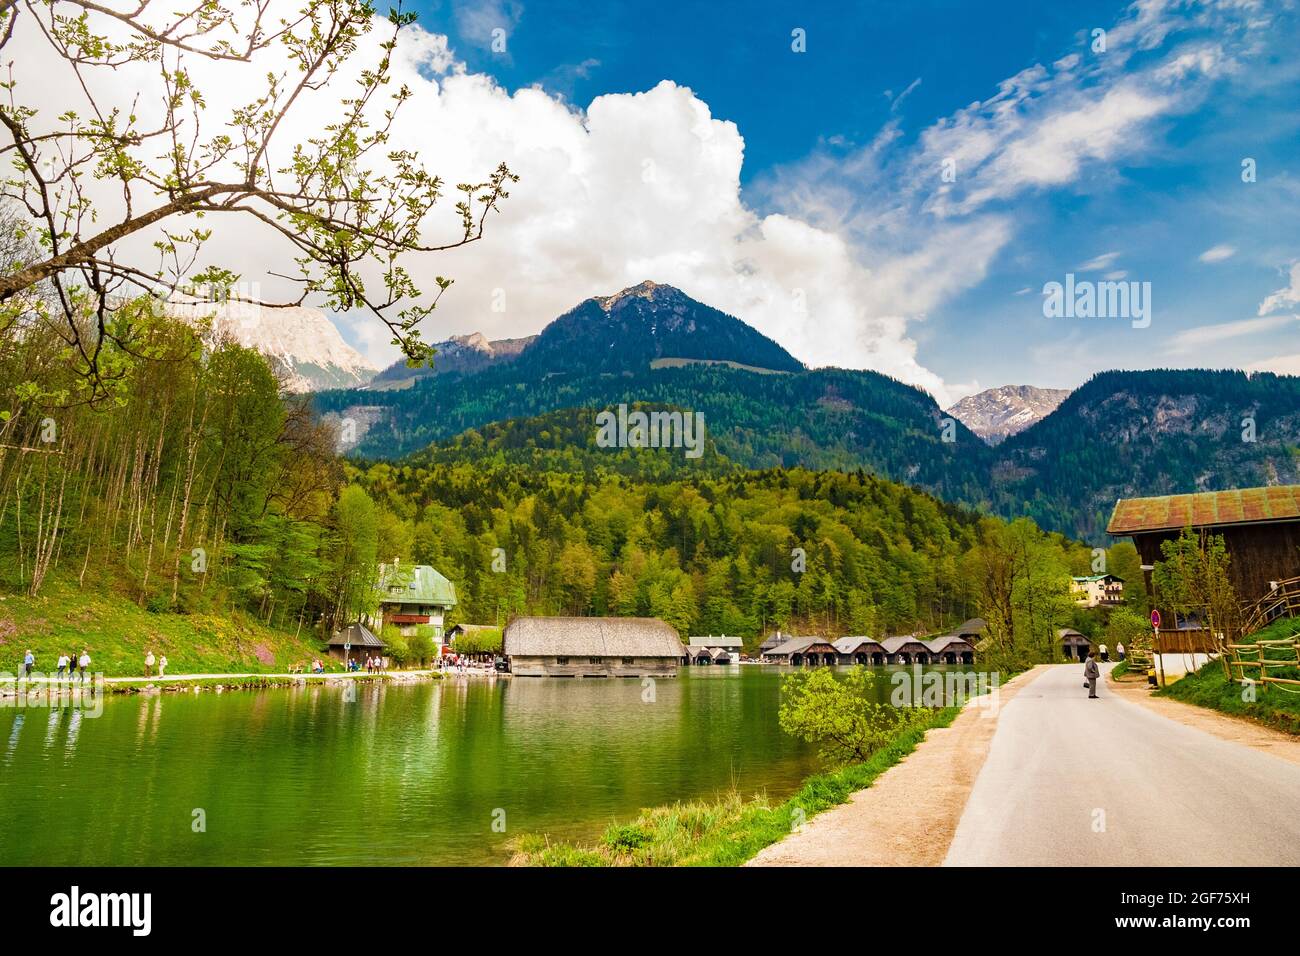 Beautiful view of the Königssee lake surrounded by mountains in Bavaria, Germany. In front is the municipality Schönau am Königssee with a row of boat... Stock Photo